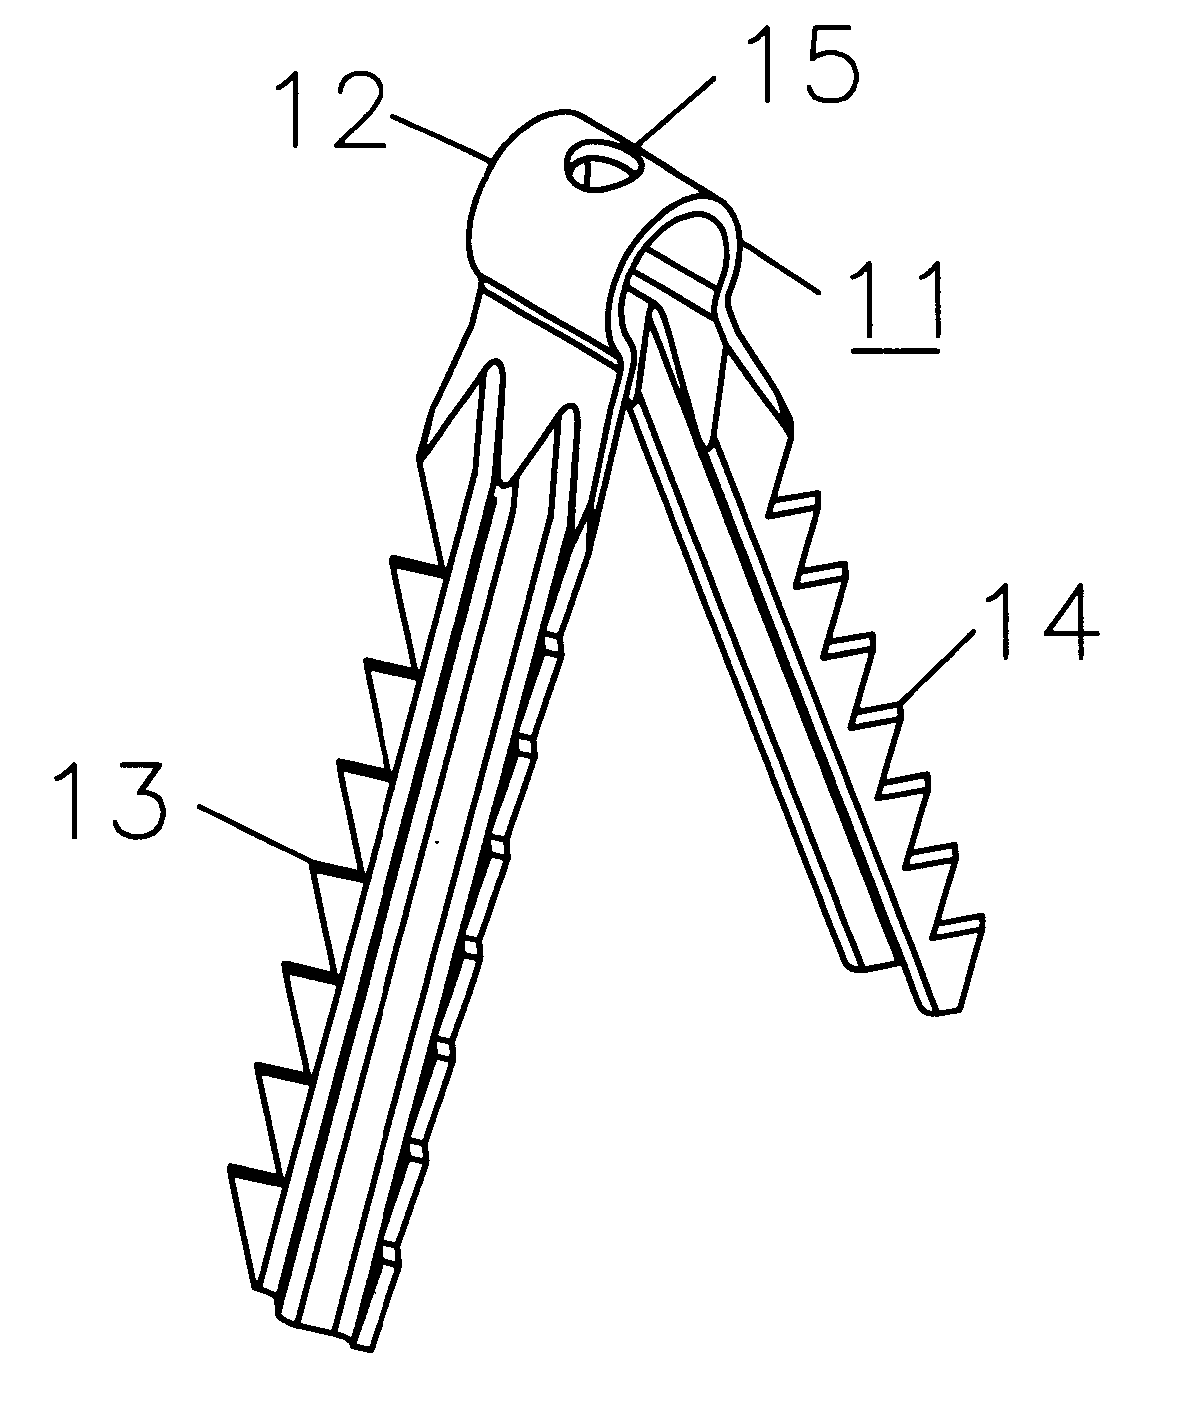 Compact cable anchor for retainment and attachment of cables and tubing